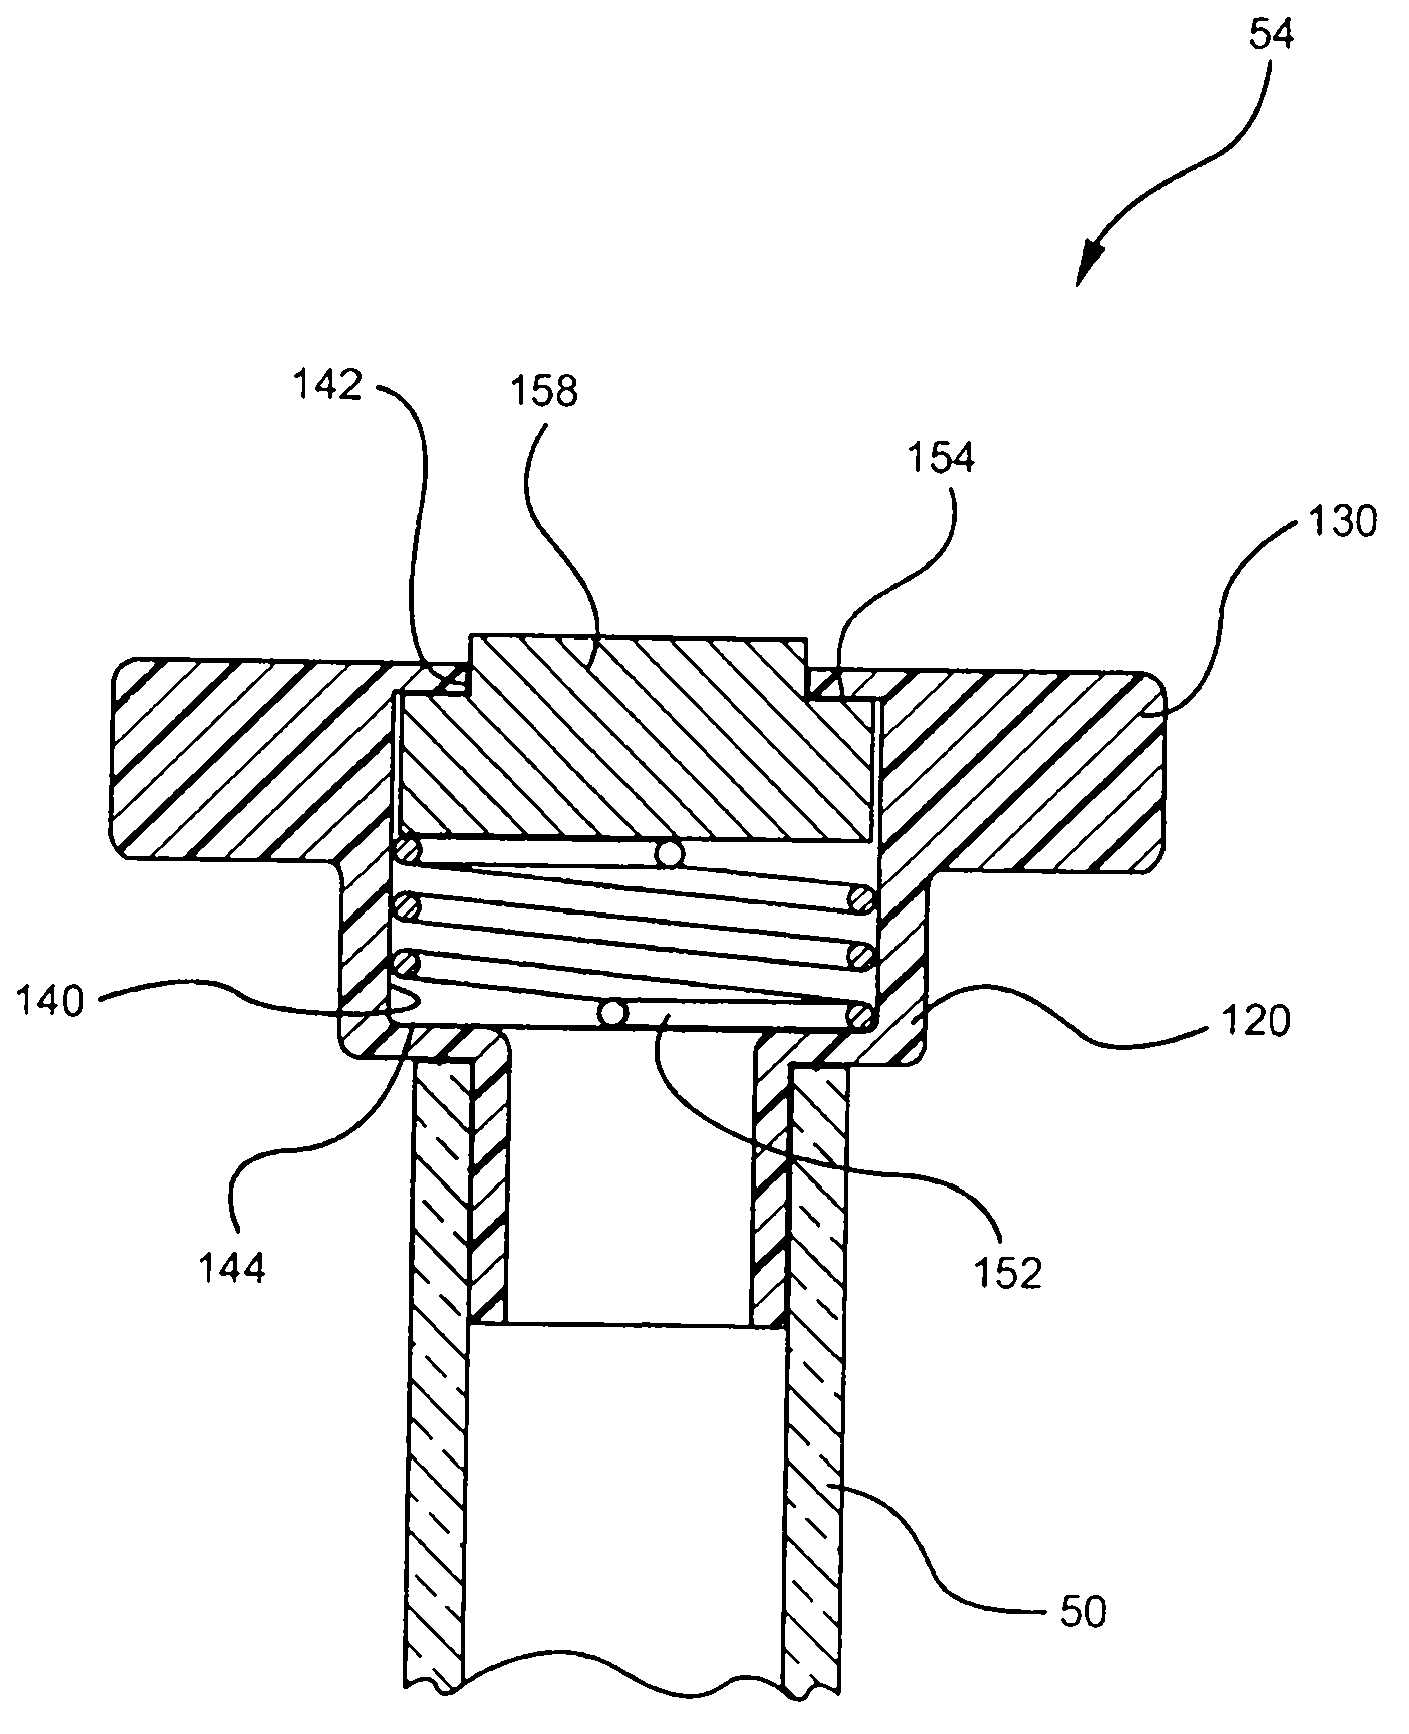 Systems and methods for providing a closed venting hazardous drug IV set